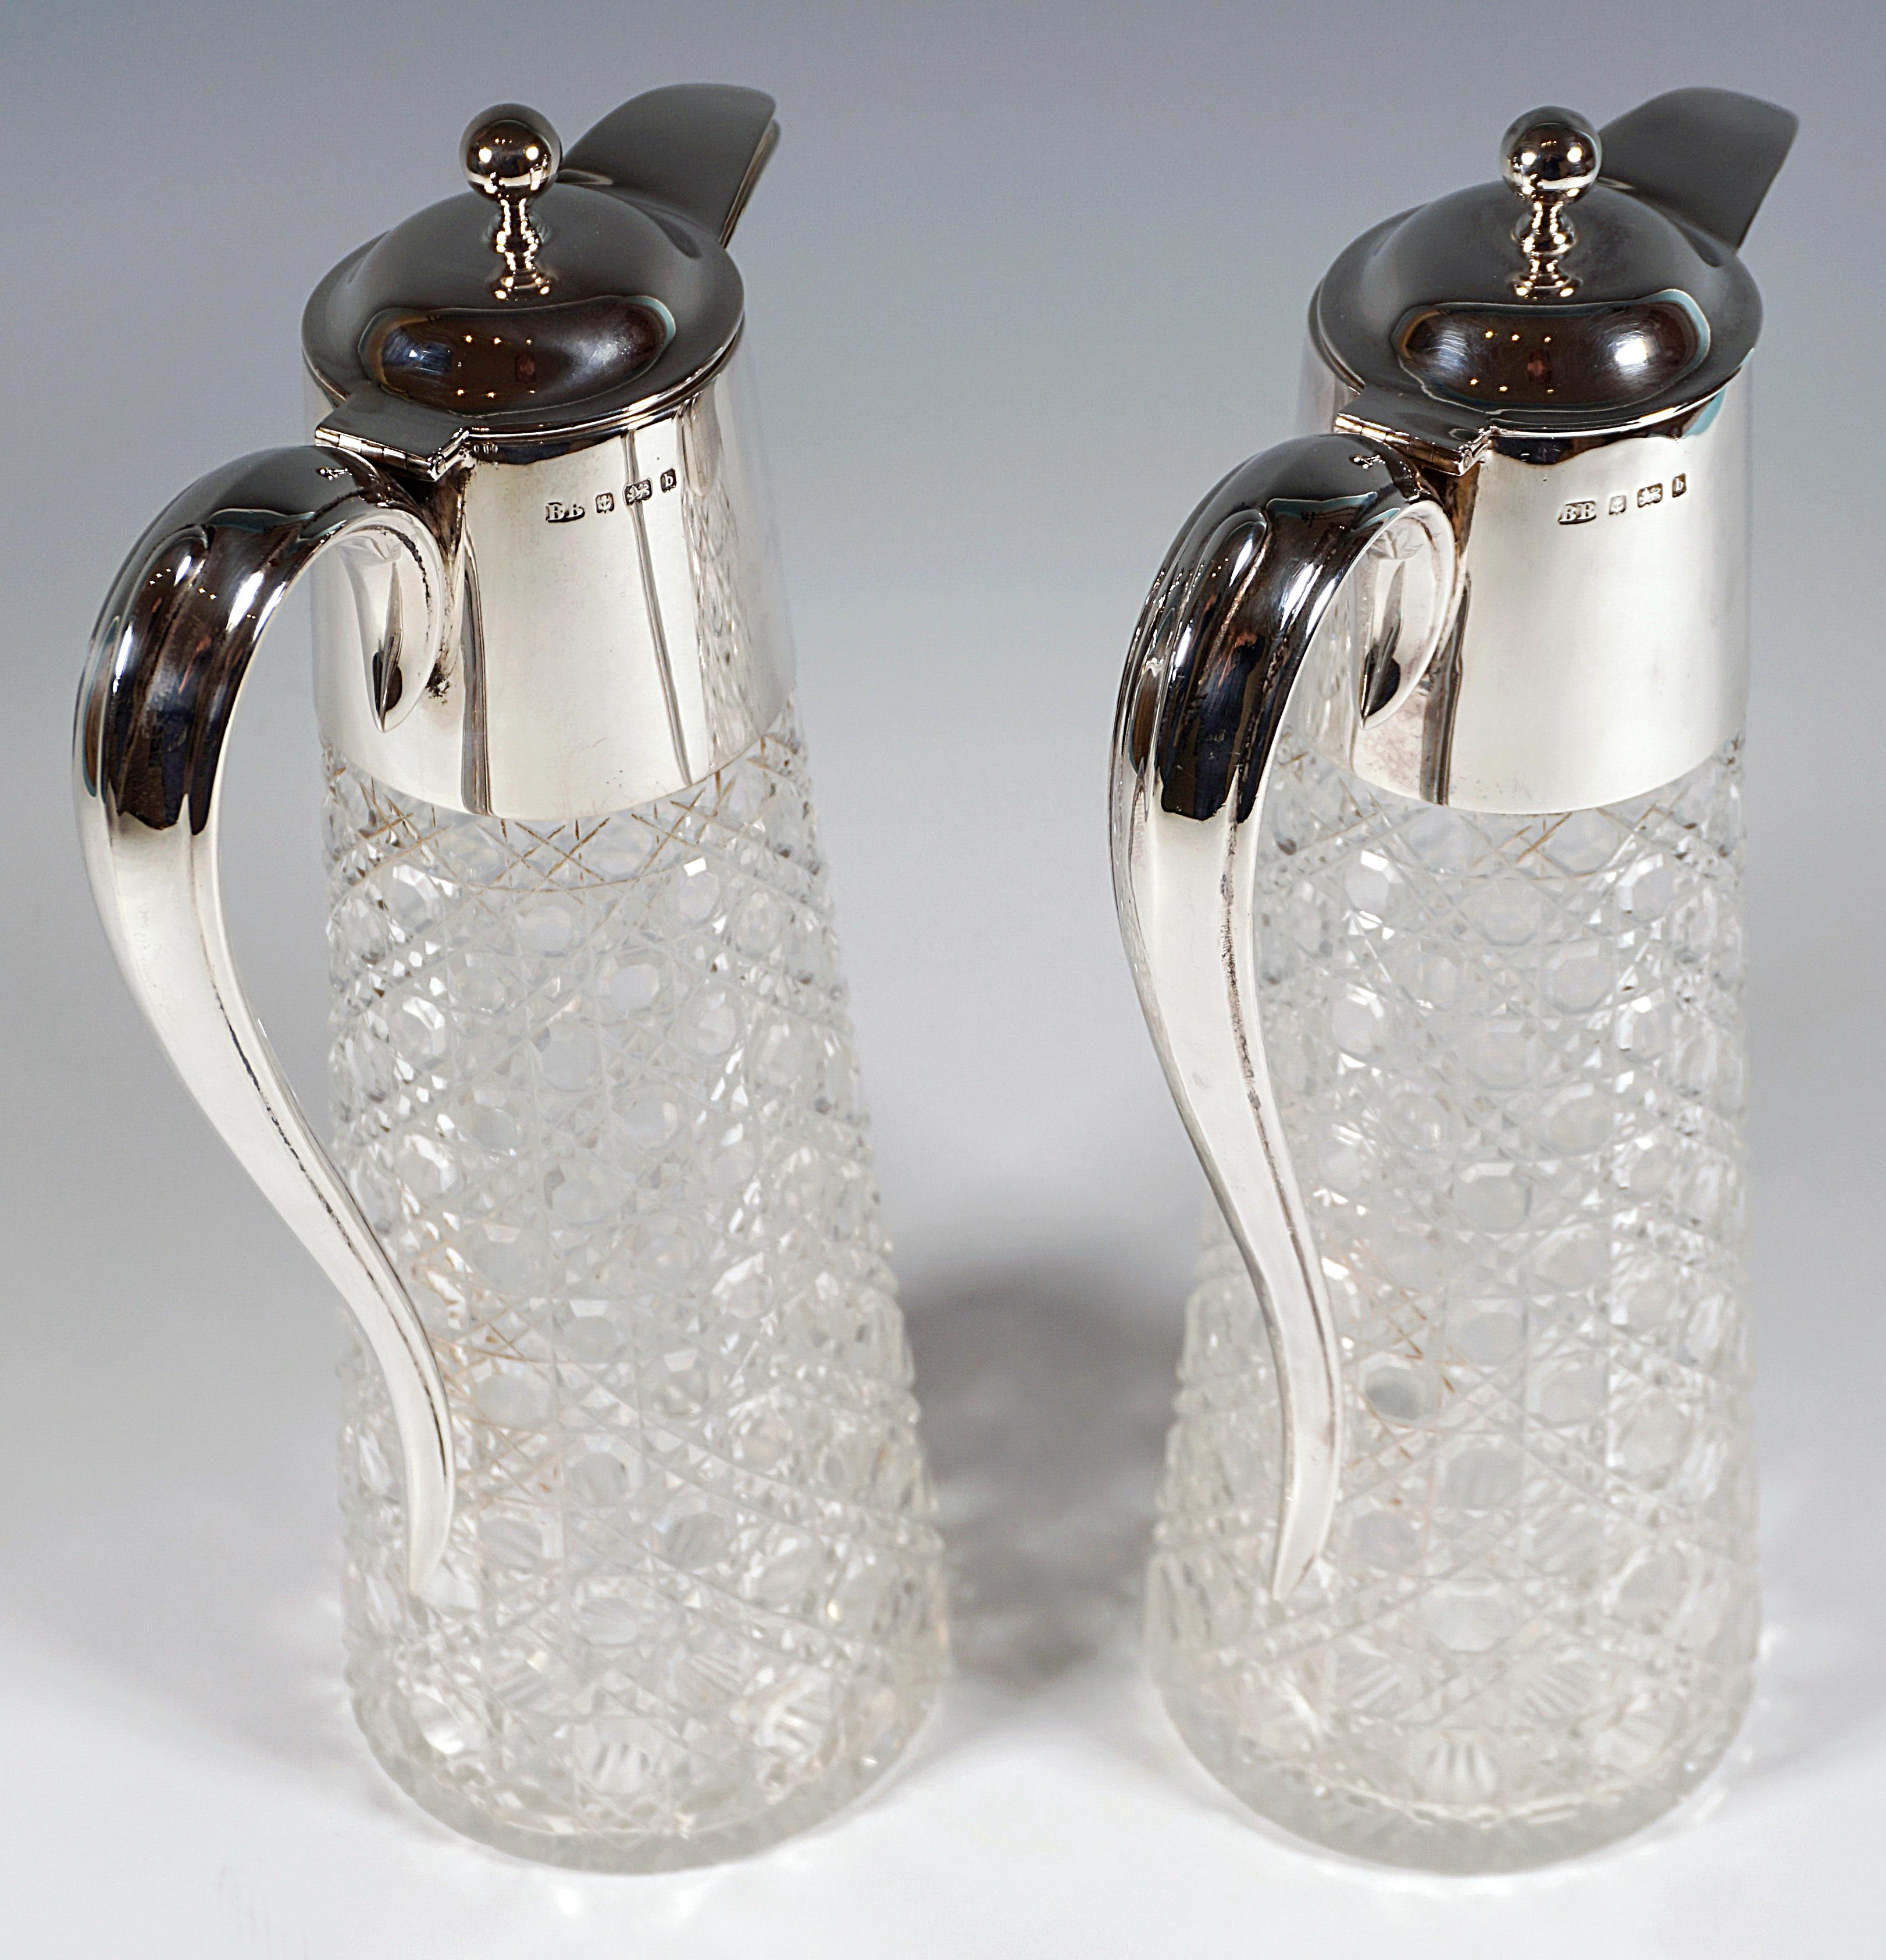 Pair Of Art Nouveau Carafes With Silver Mount by Barker Brothers Birmingham 1901 In Good Condition For Sale In Vienna, AT